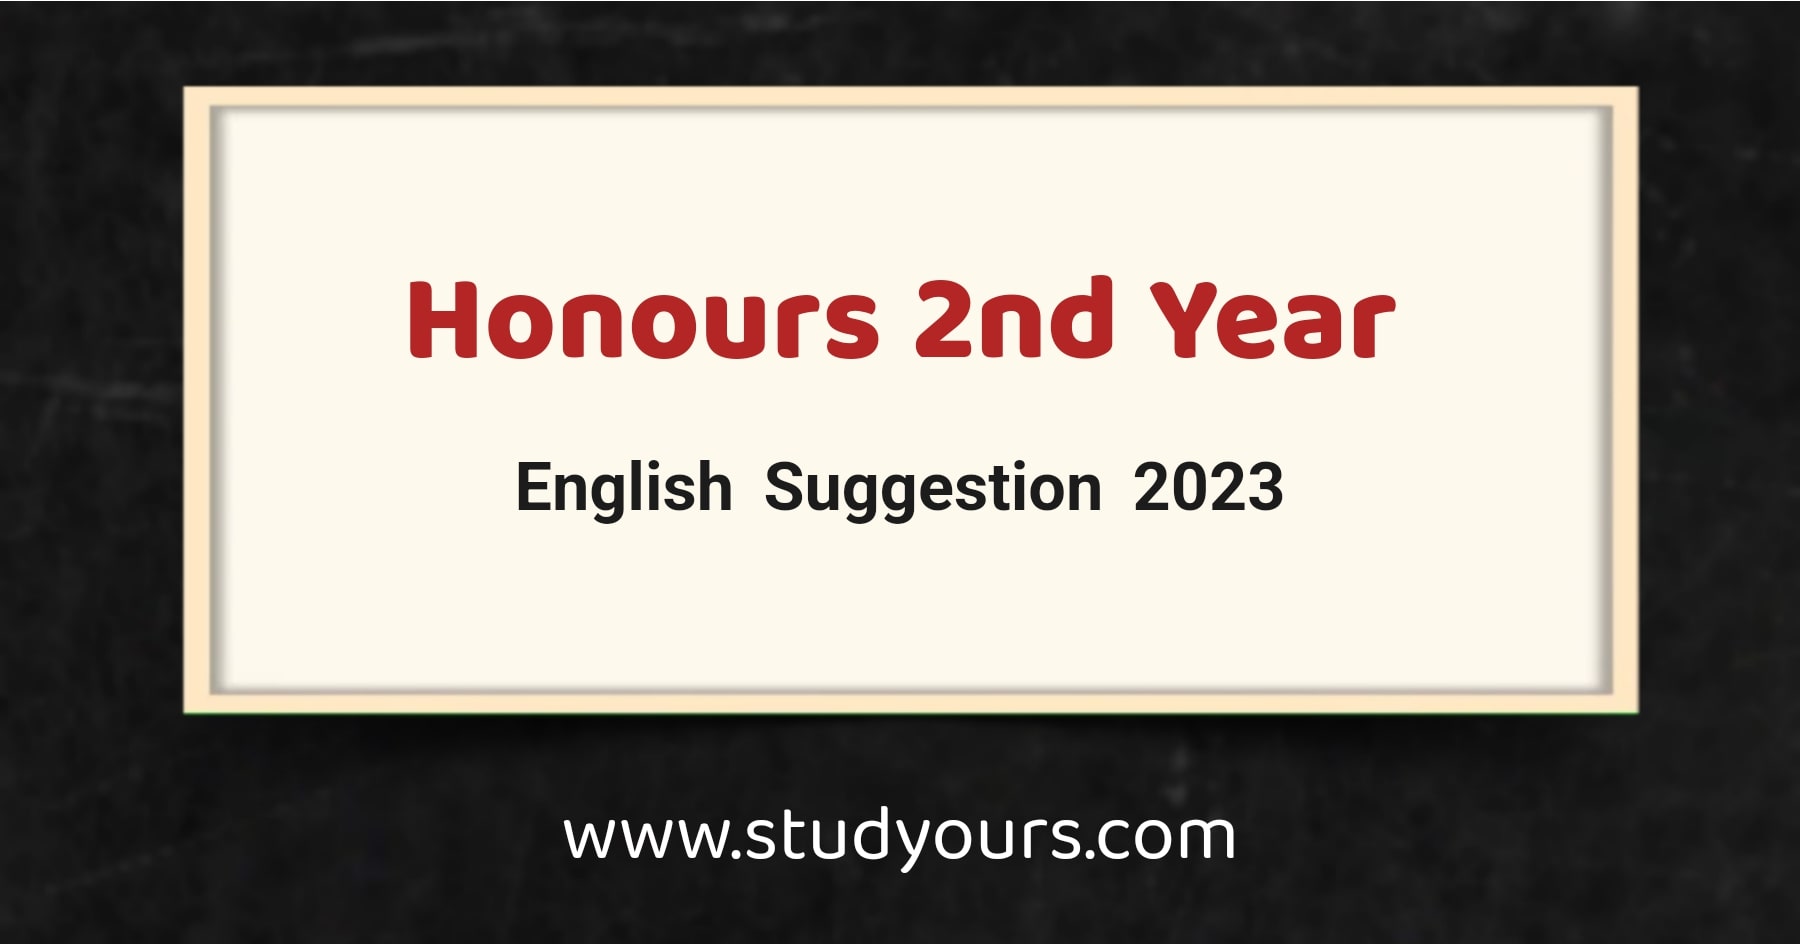 Honours 2nd Year English Suggestion 2023